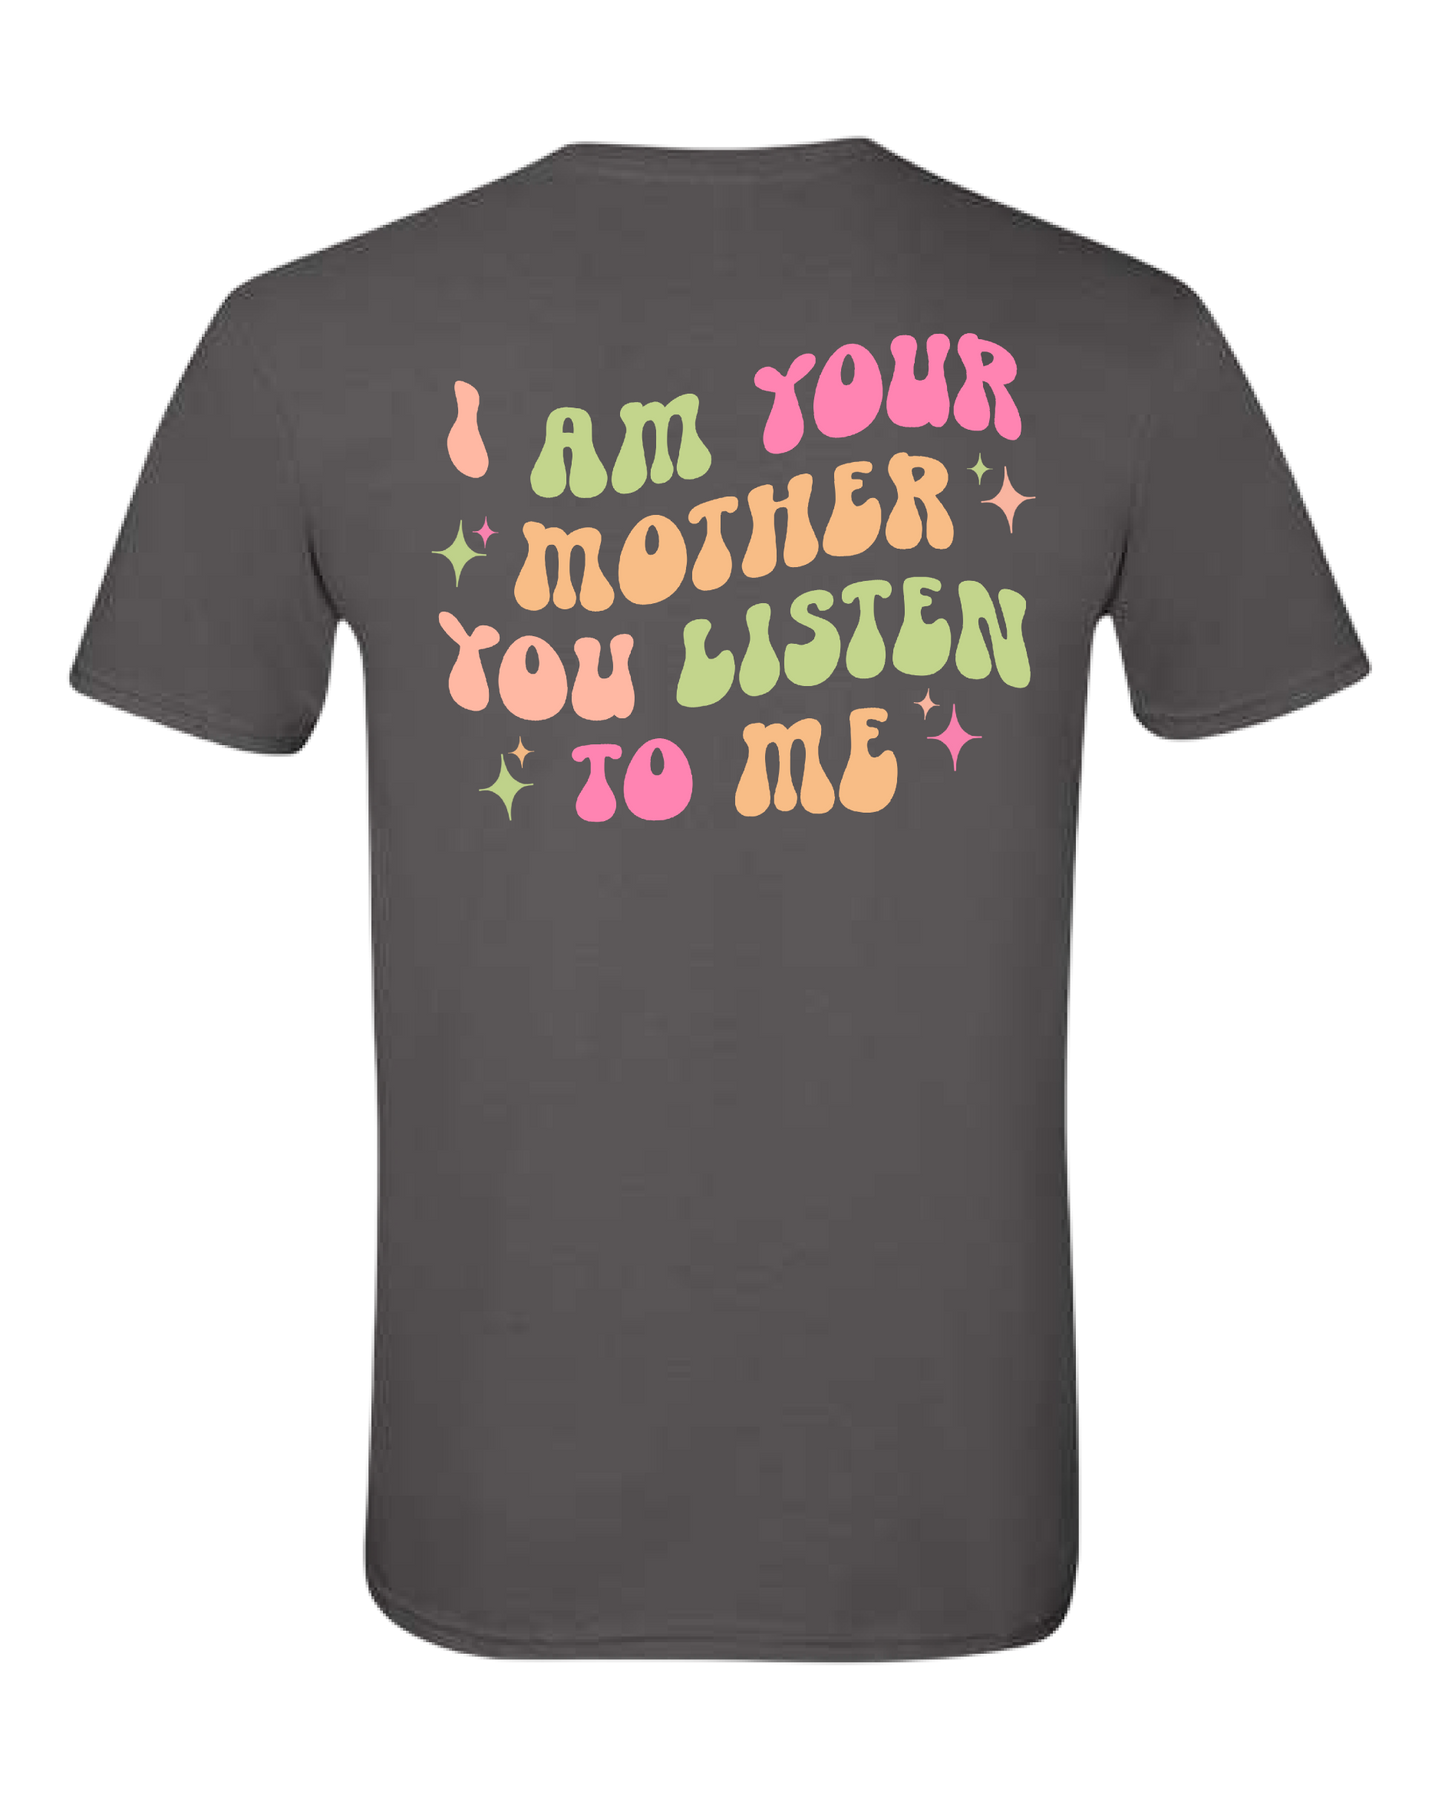 I am Your Mother Tee